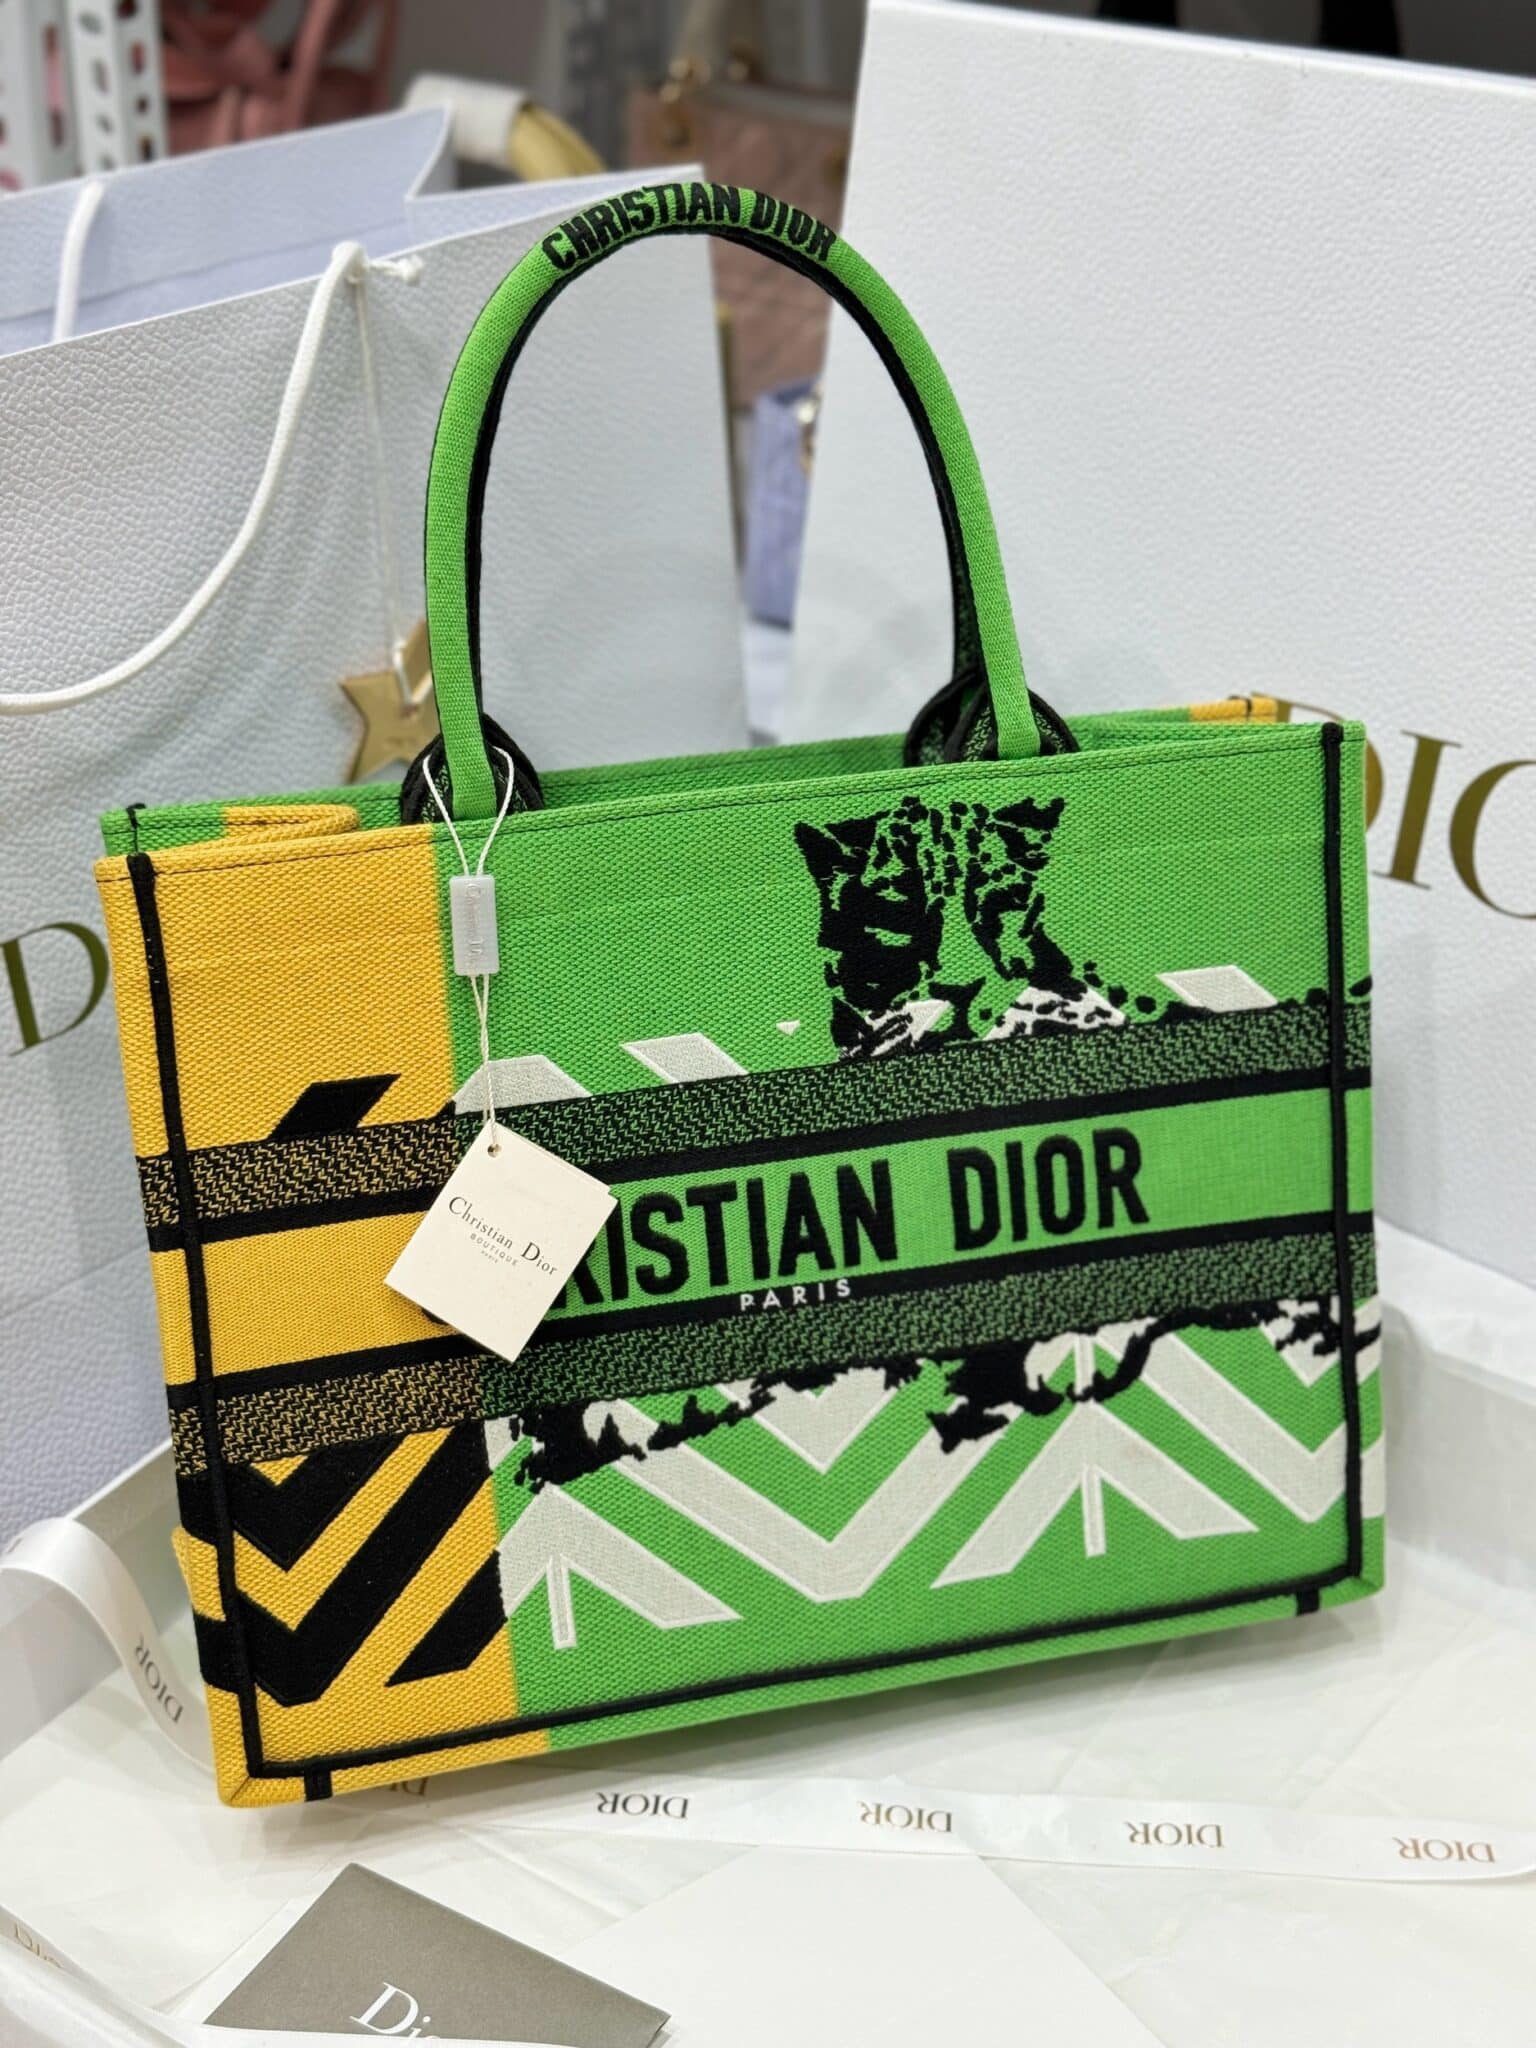 TÚI XÁCH DIOR BOOK TOTE BRIGHT GREEN AND ORANG D-JUNGLE POP EMBROIDERY LIKE AUTH 36CM